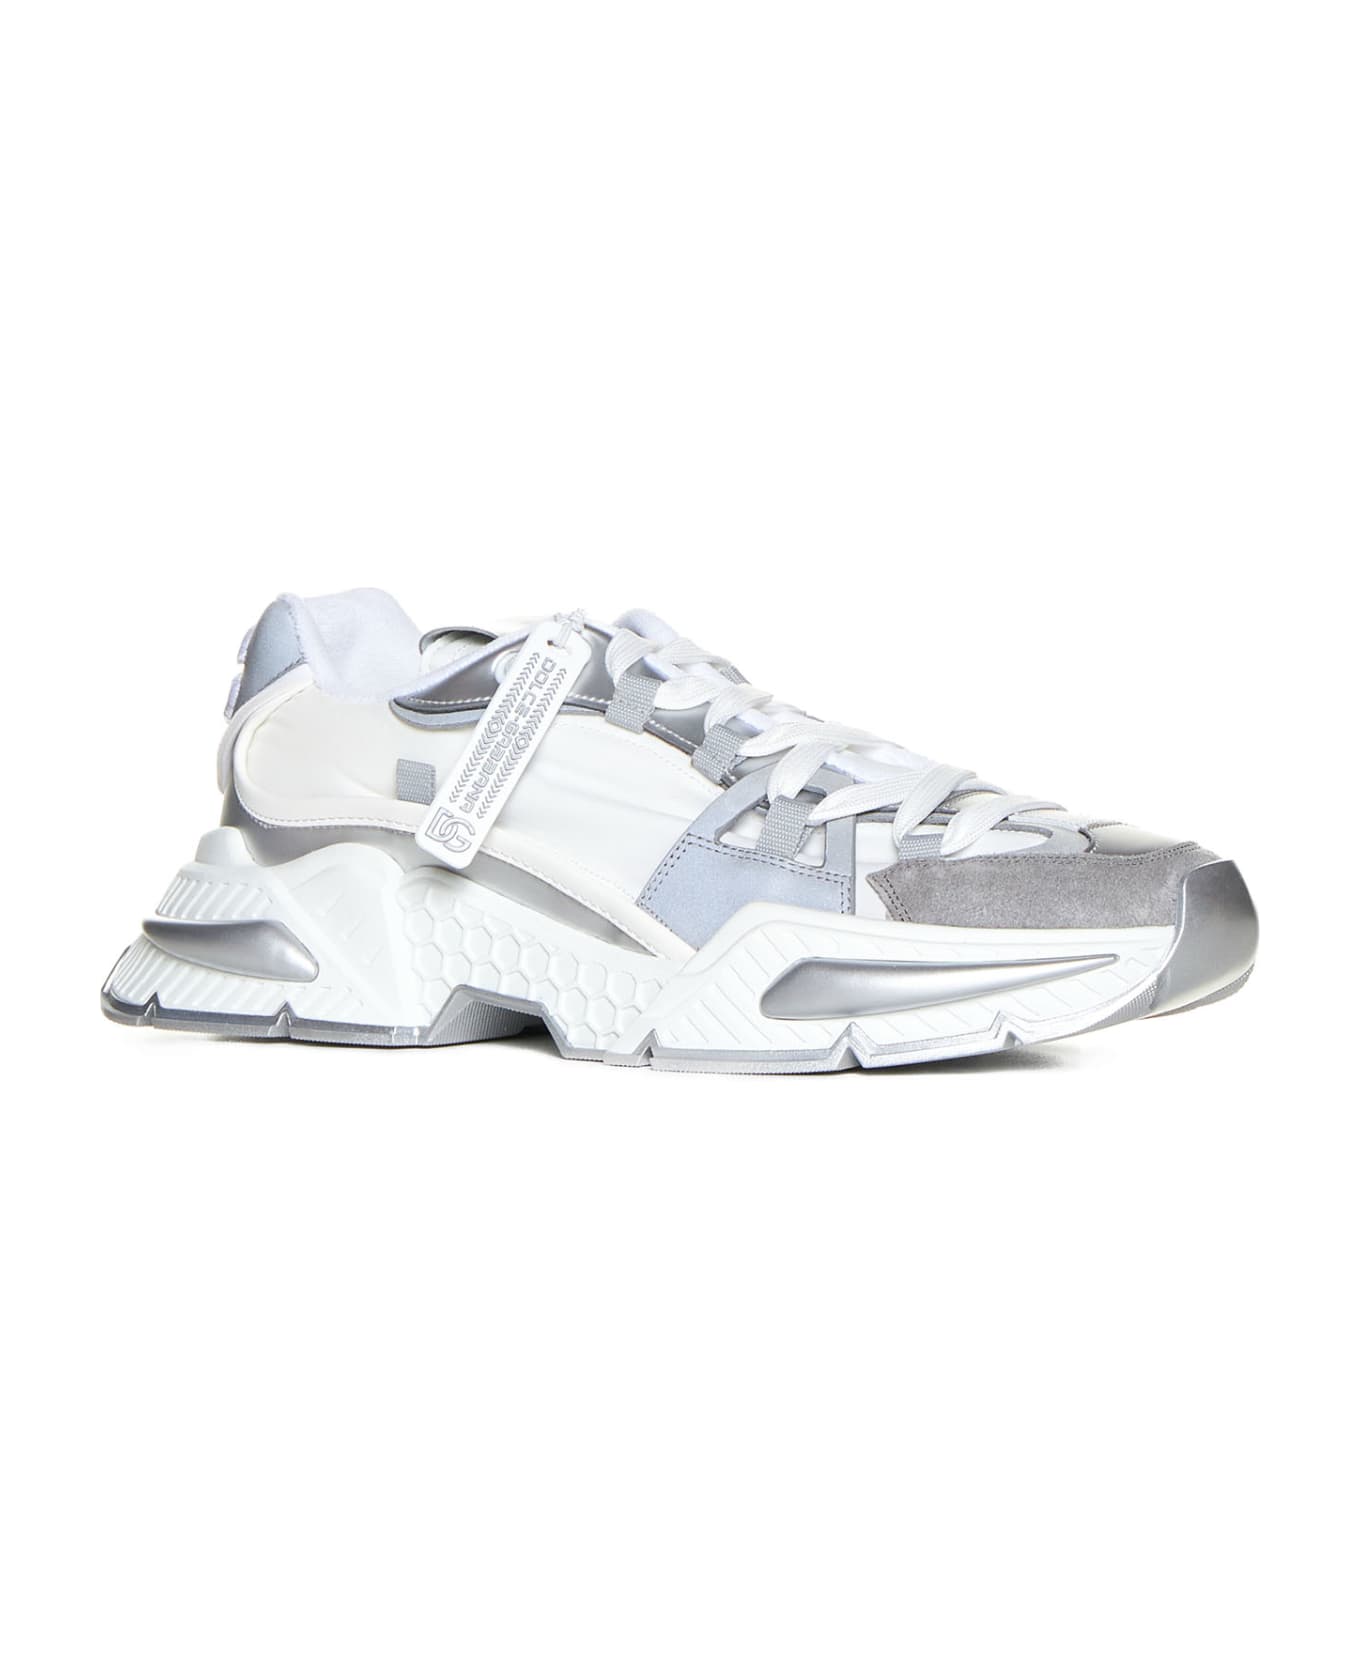 Dolce & Gabbana Airmaster Sneakers - Argento/bianco